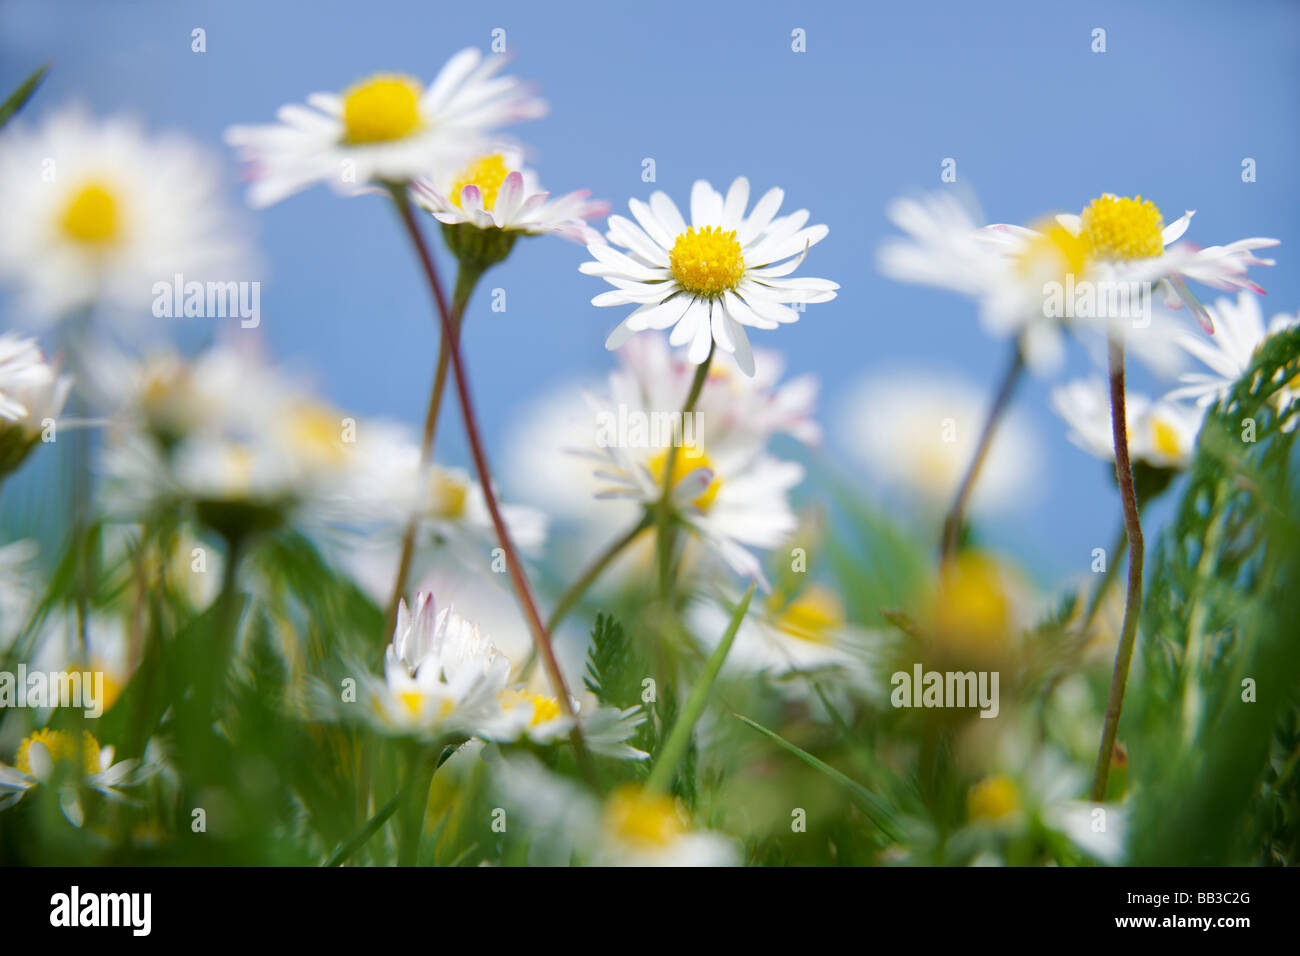 daisies growing in grass with blue sky behind Stock Photo